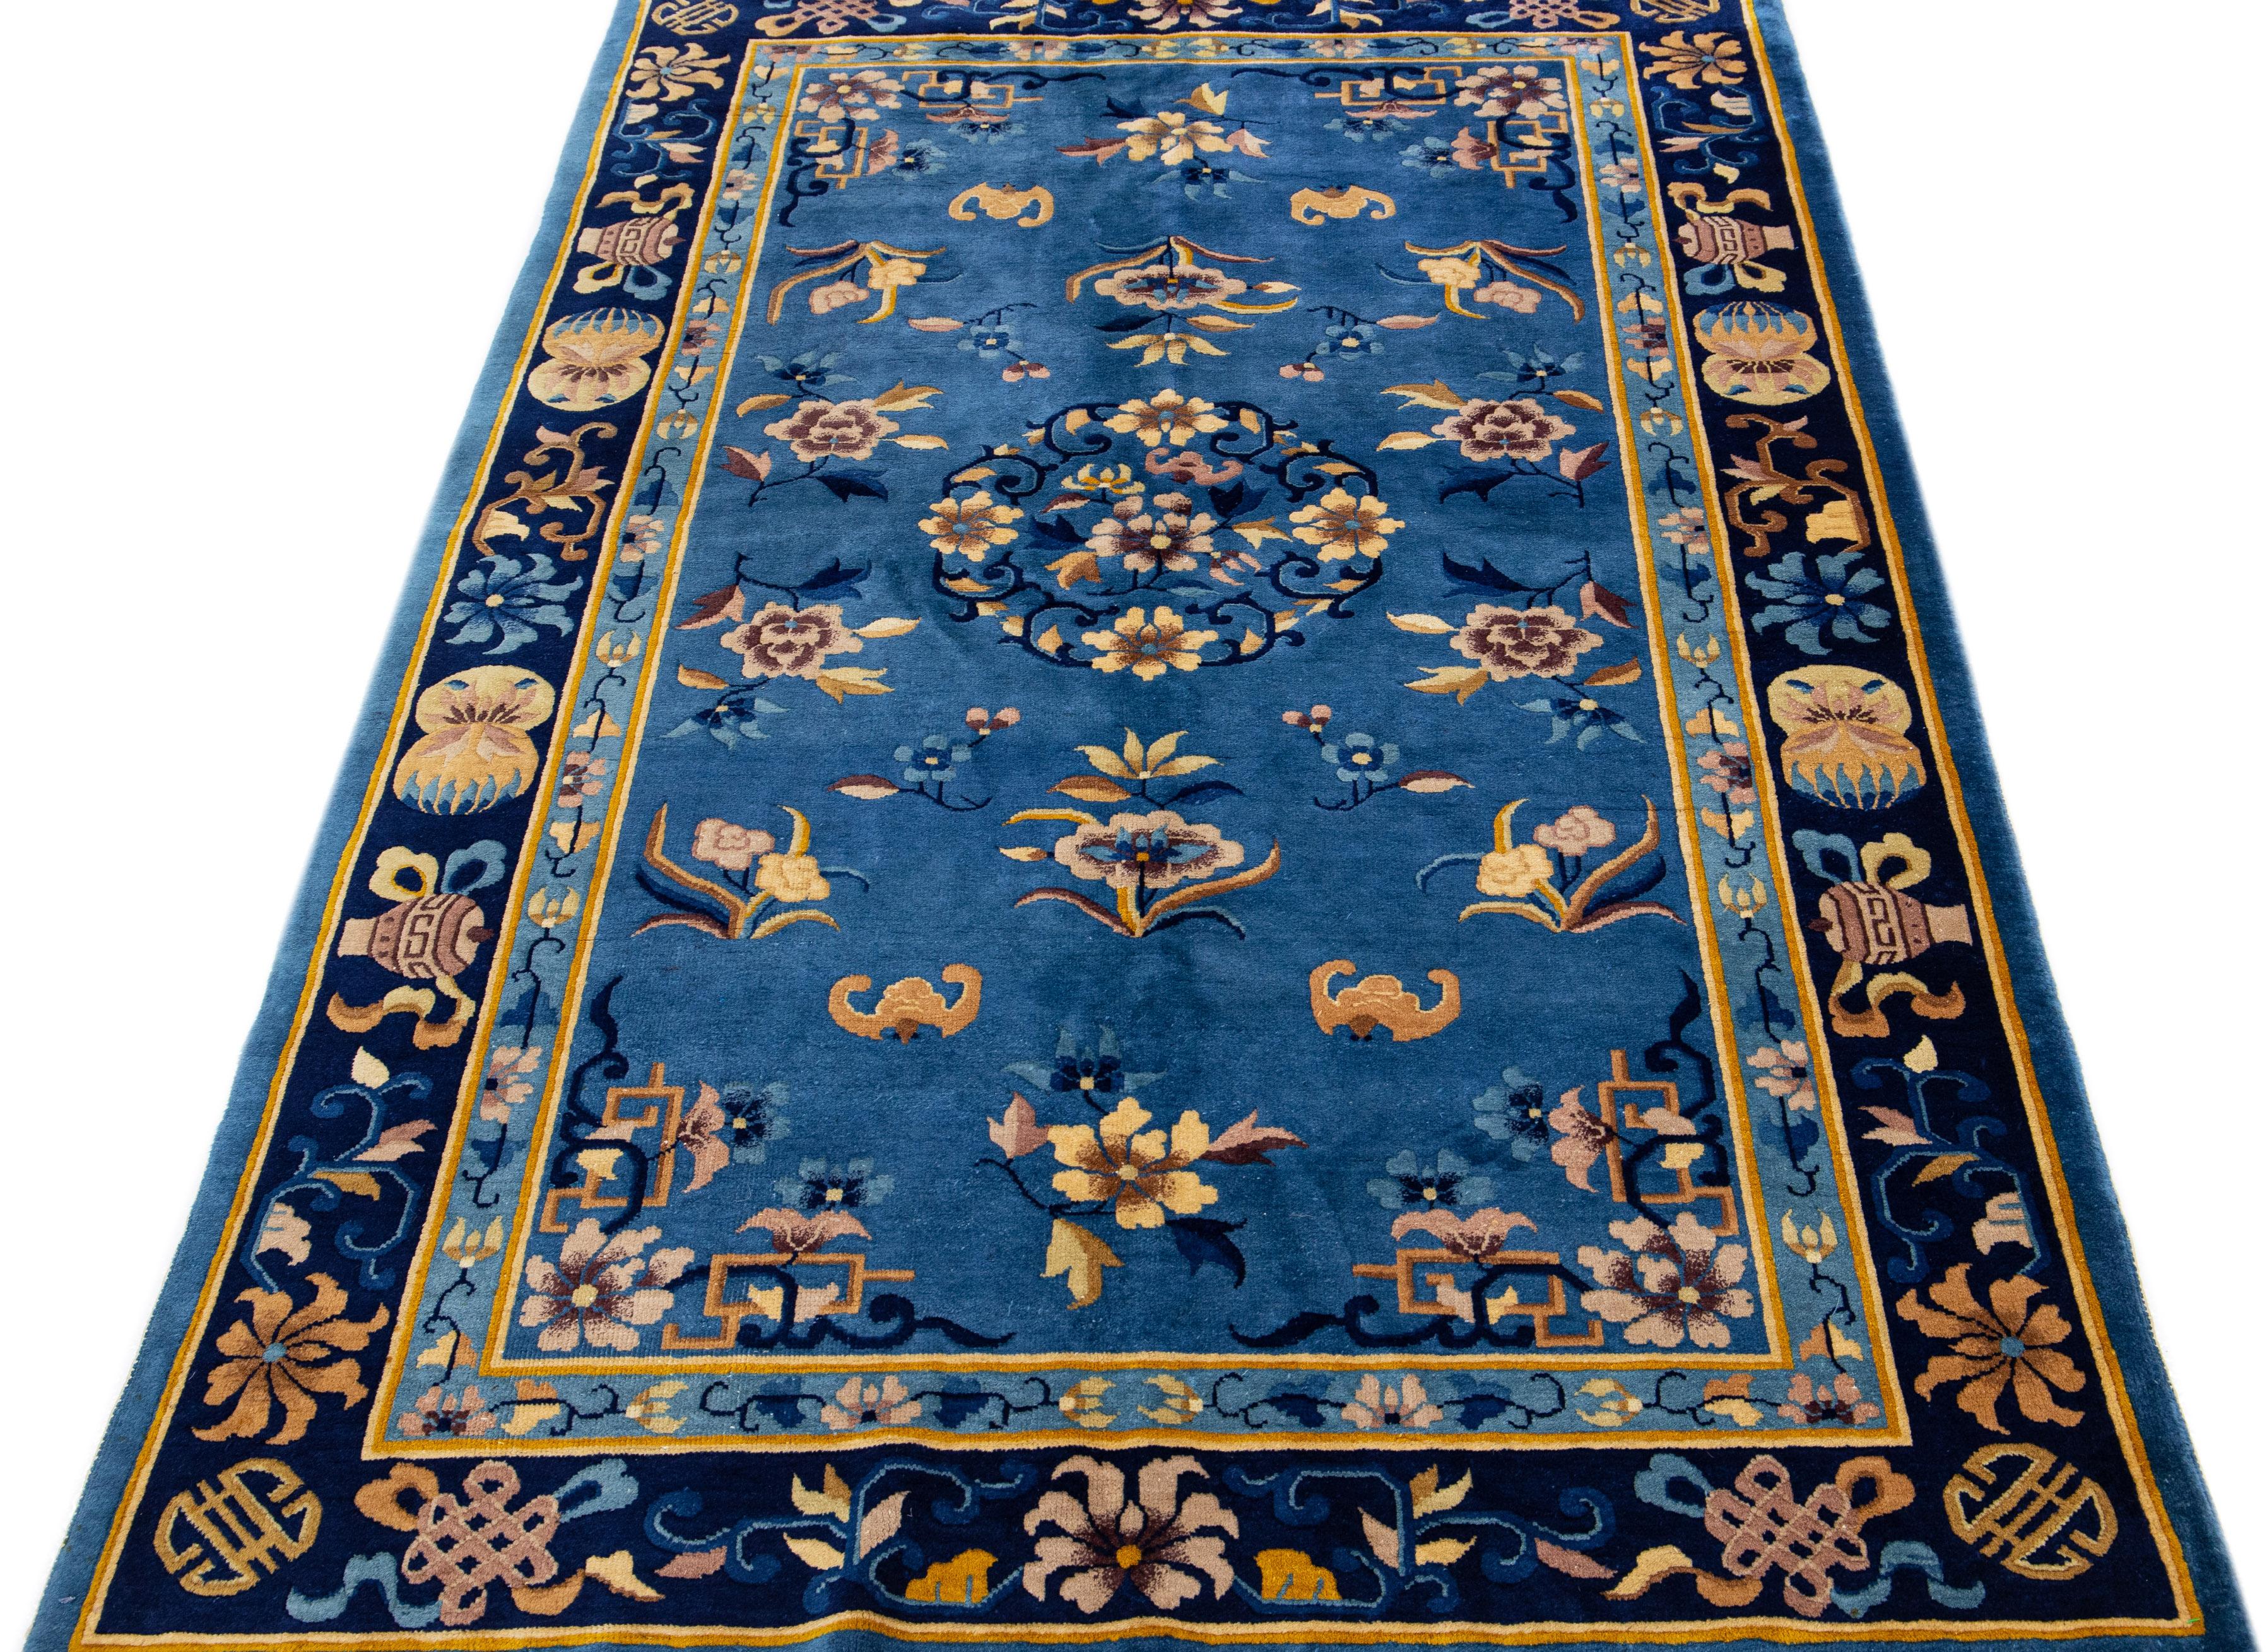 Upgrade your interior decor with this superior-quality handmade Chinese rug. Our beautiful traditional Chinese rug has a stunning blue field, multicolor accents, and a classic allover Peking pattern. This enchanting antique wool rug will make a